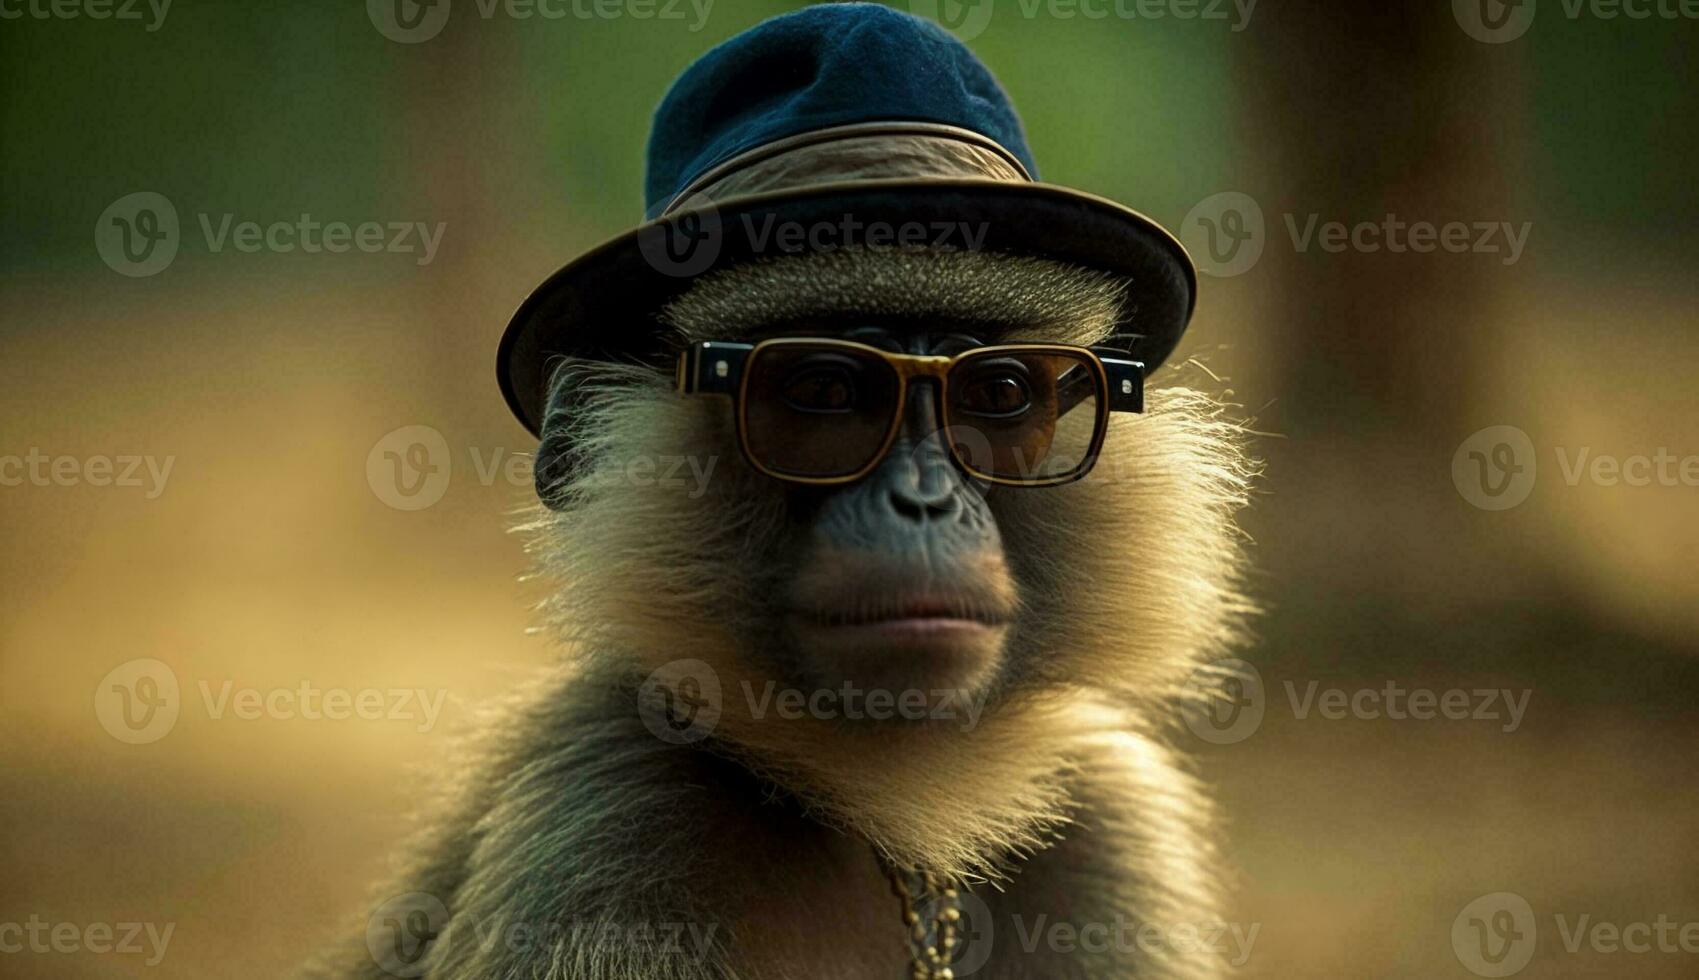 Monkey wearing glasses holding a camera poses for a photo, photo